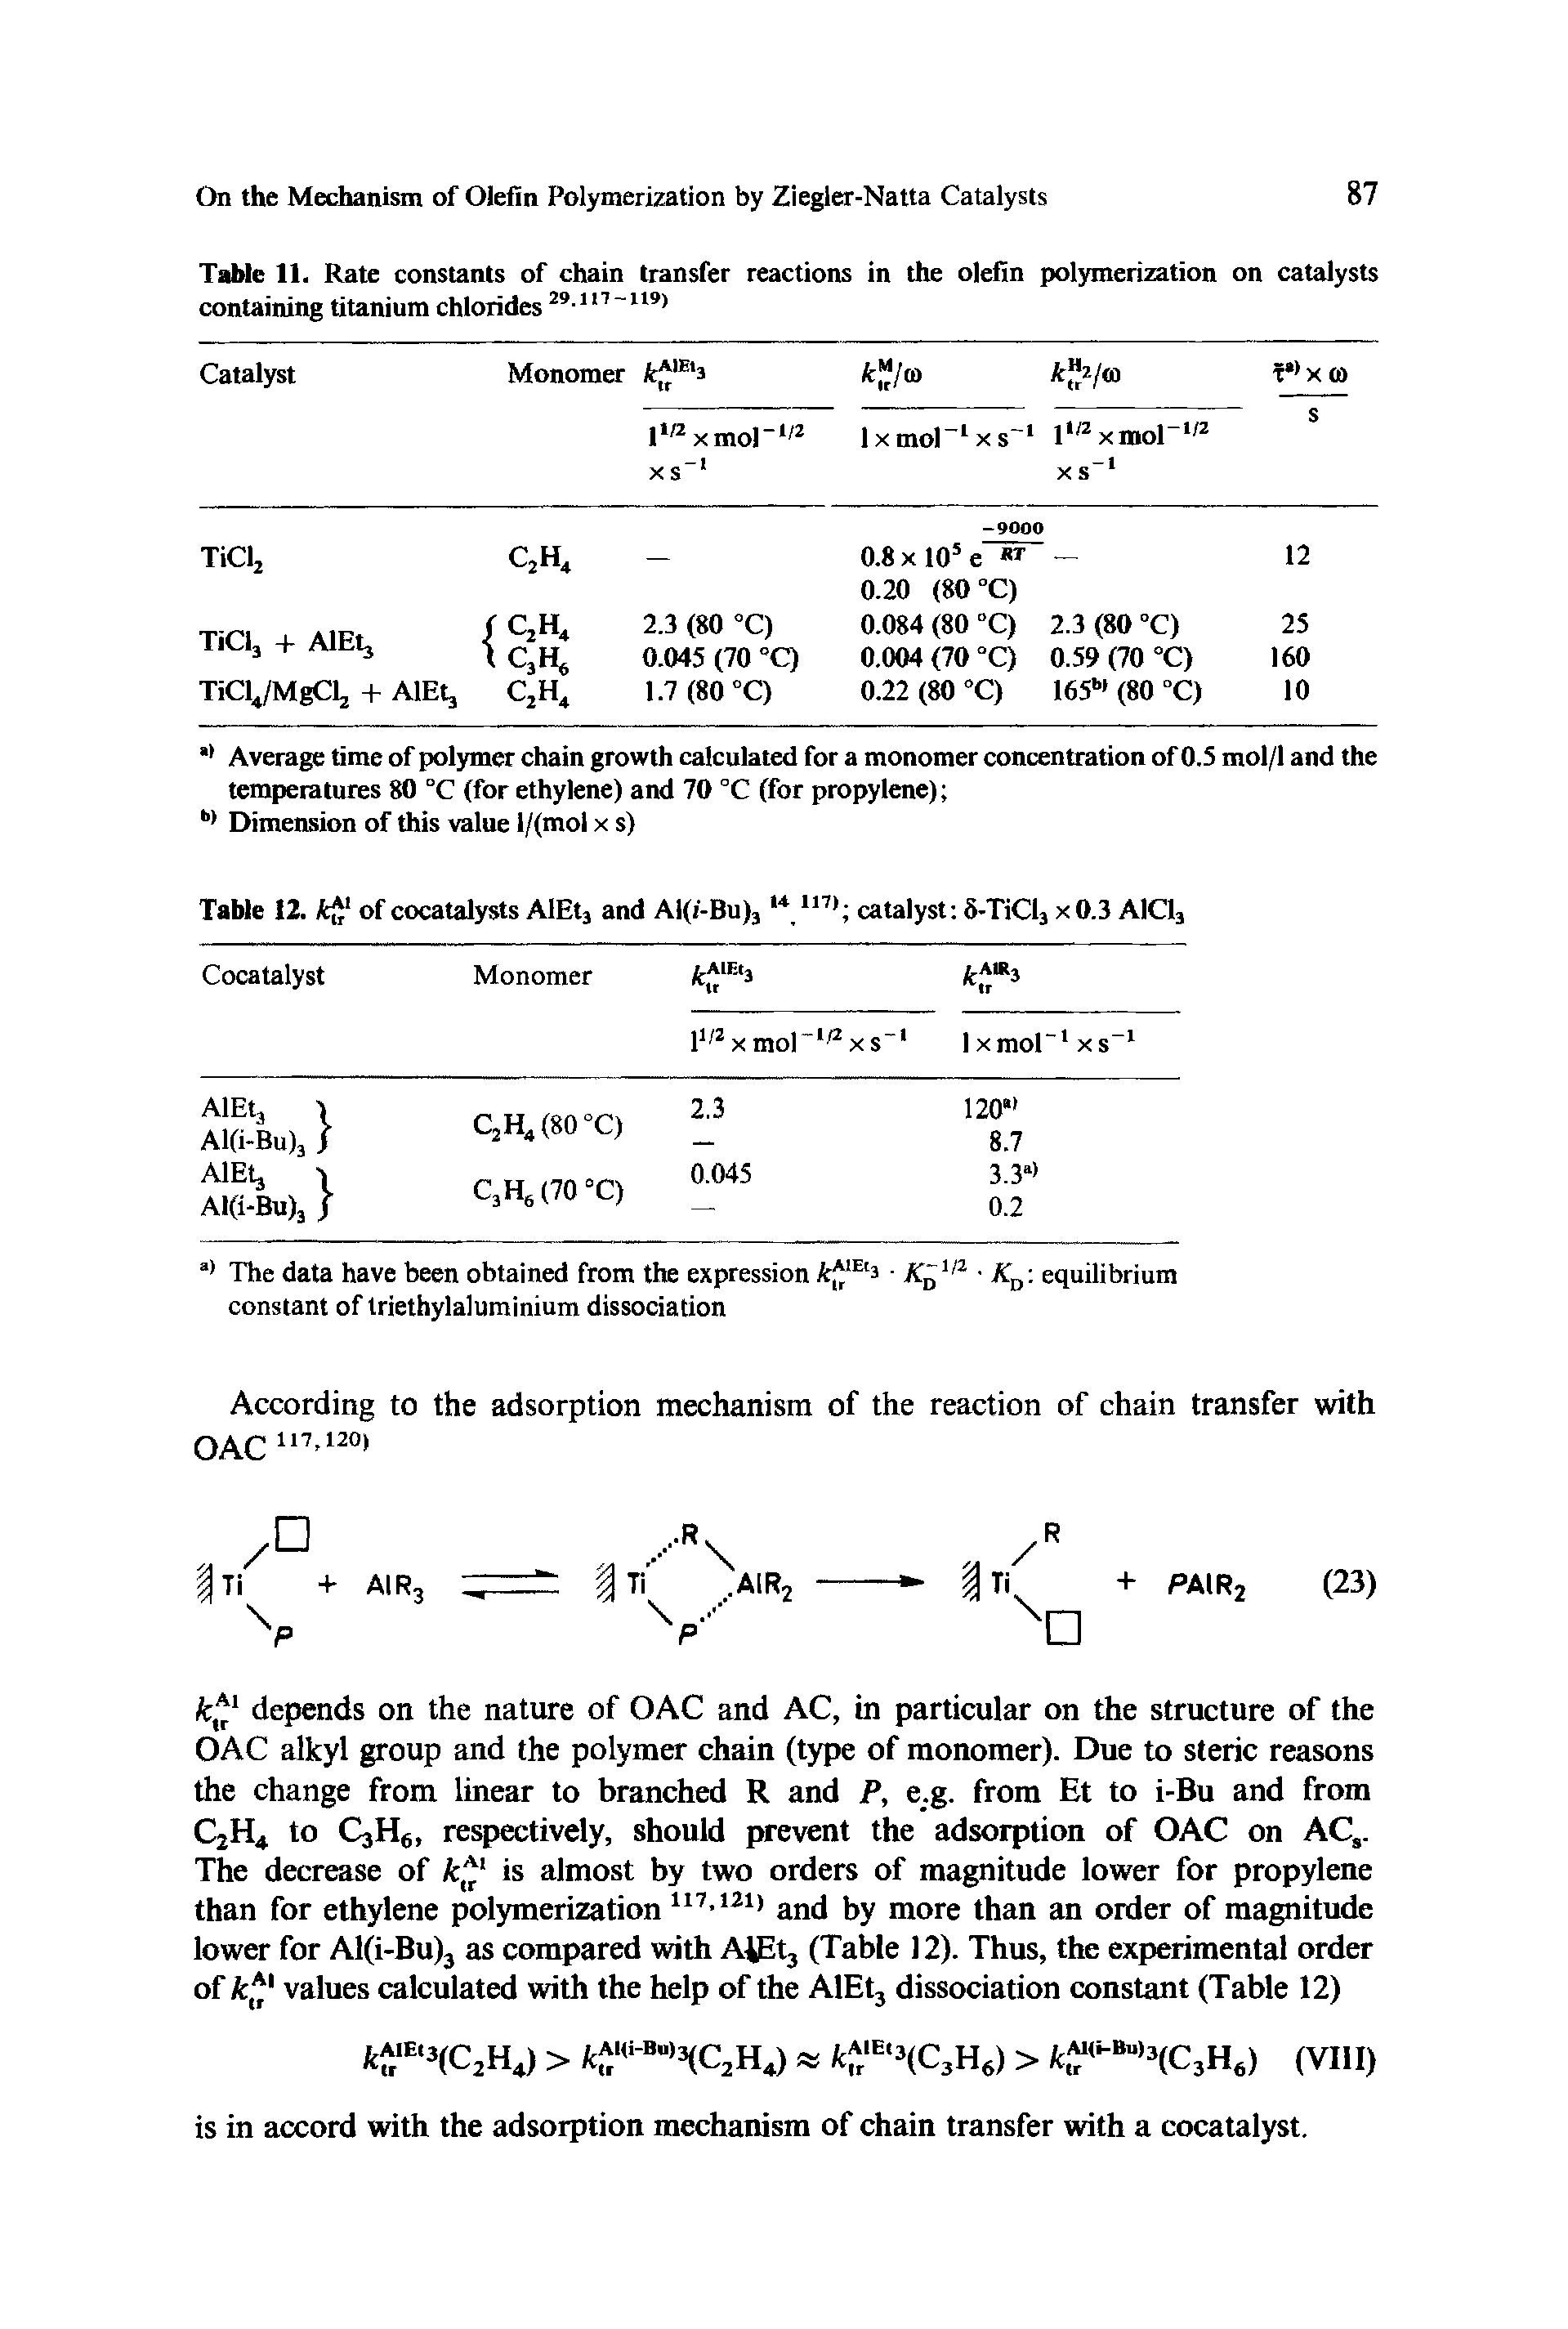 Table 11. Rate constants of chain transfer reactions in the olefin polymerization on catalysts containing titanium chlorides 2 .in-n9)...